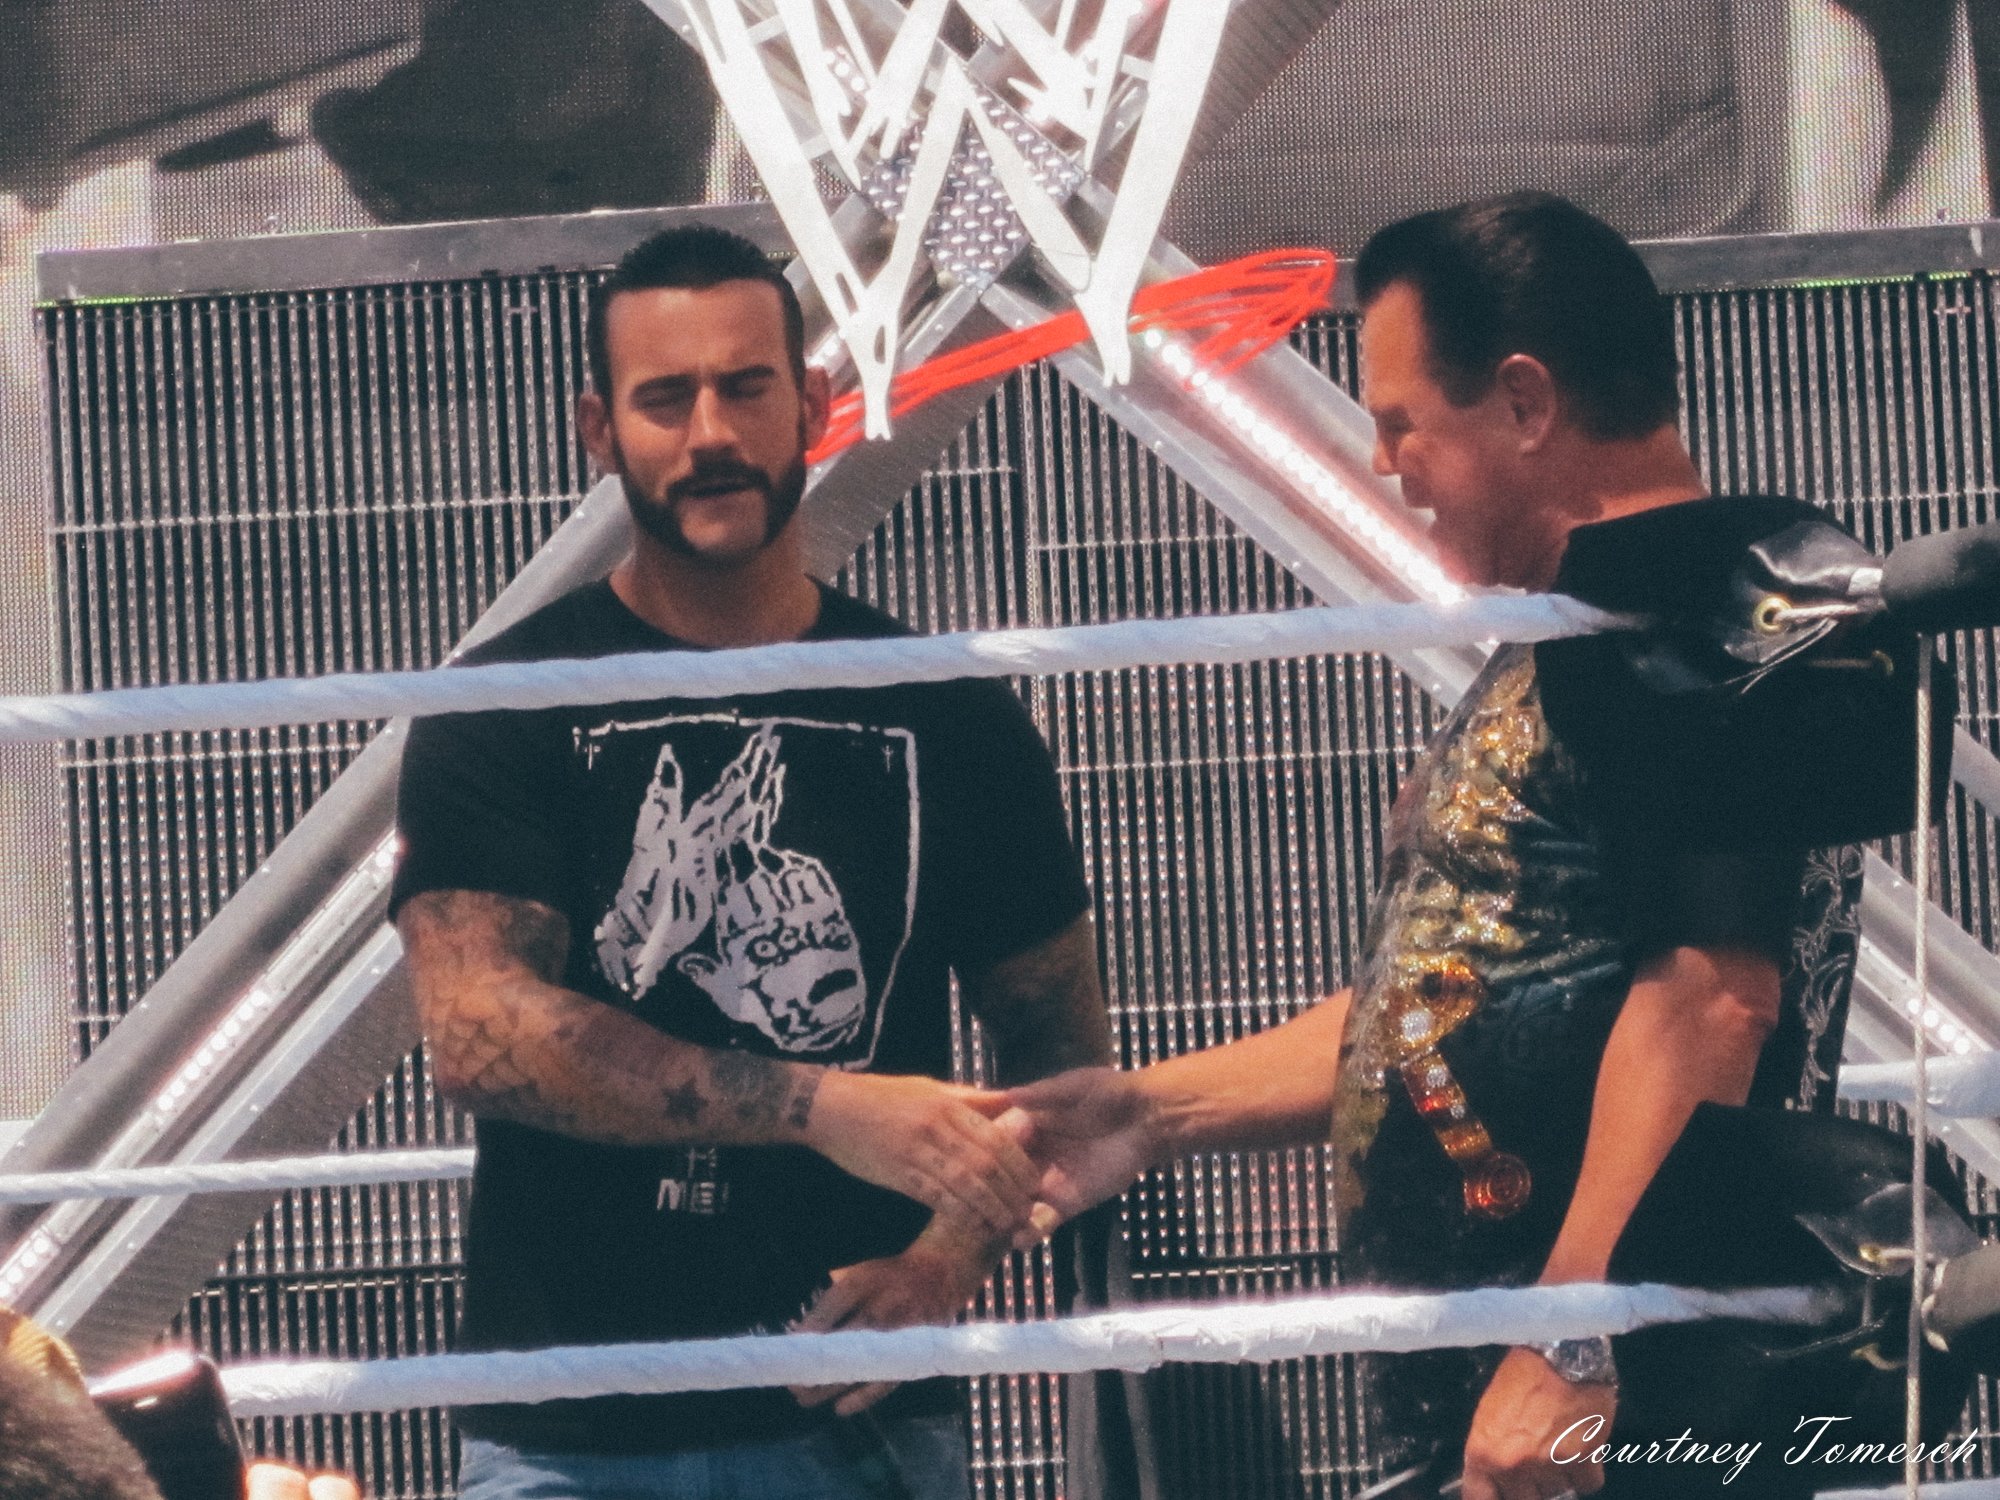 CM Punk and Lawler